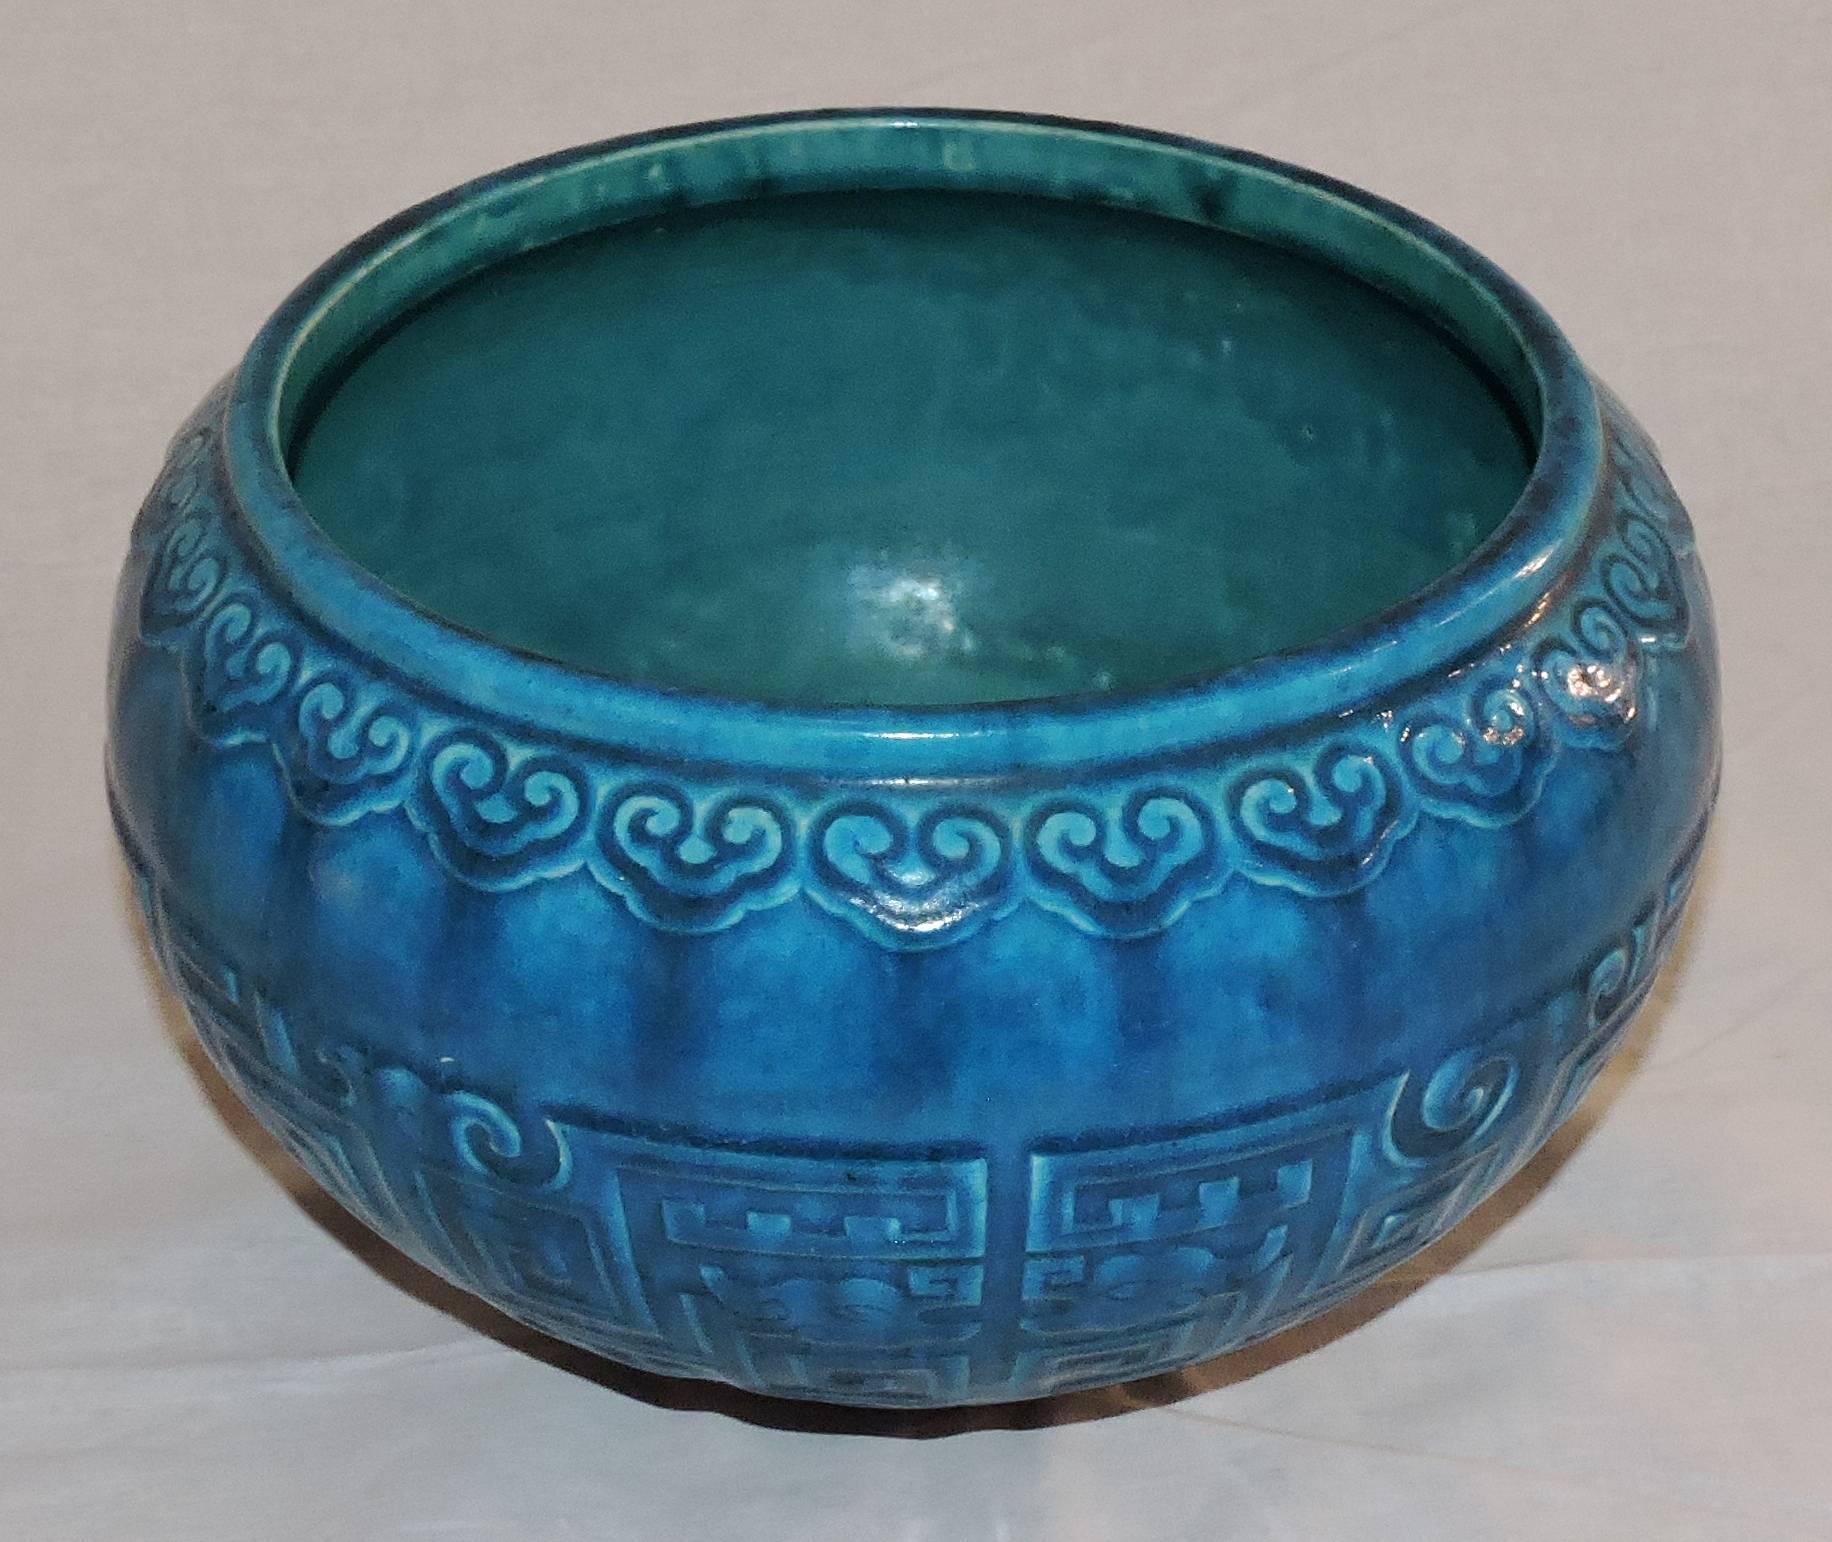 A Théodore Deck blue-Persian faience cachepot in the Chinese style, modelled in low relief and incised with fretwork and scrolls pattern.